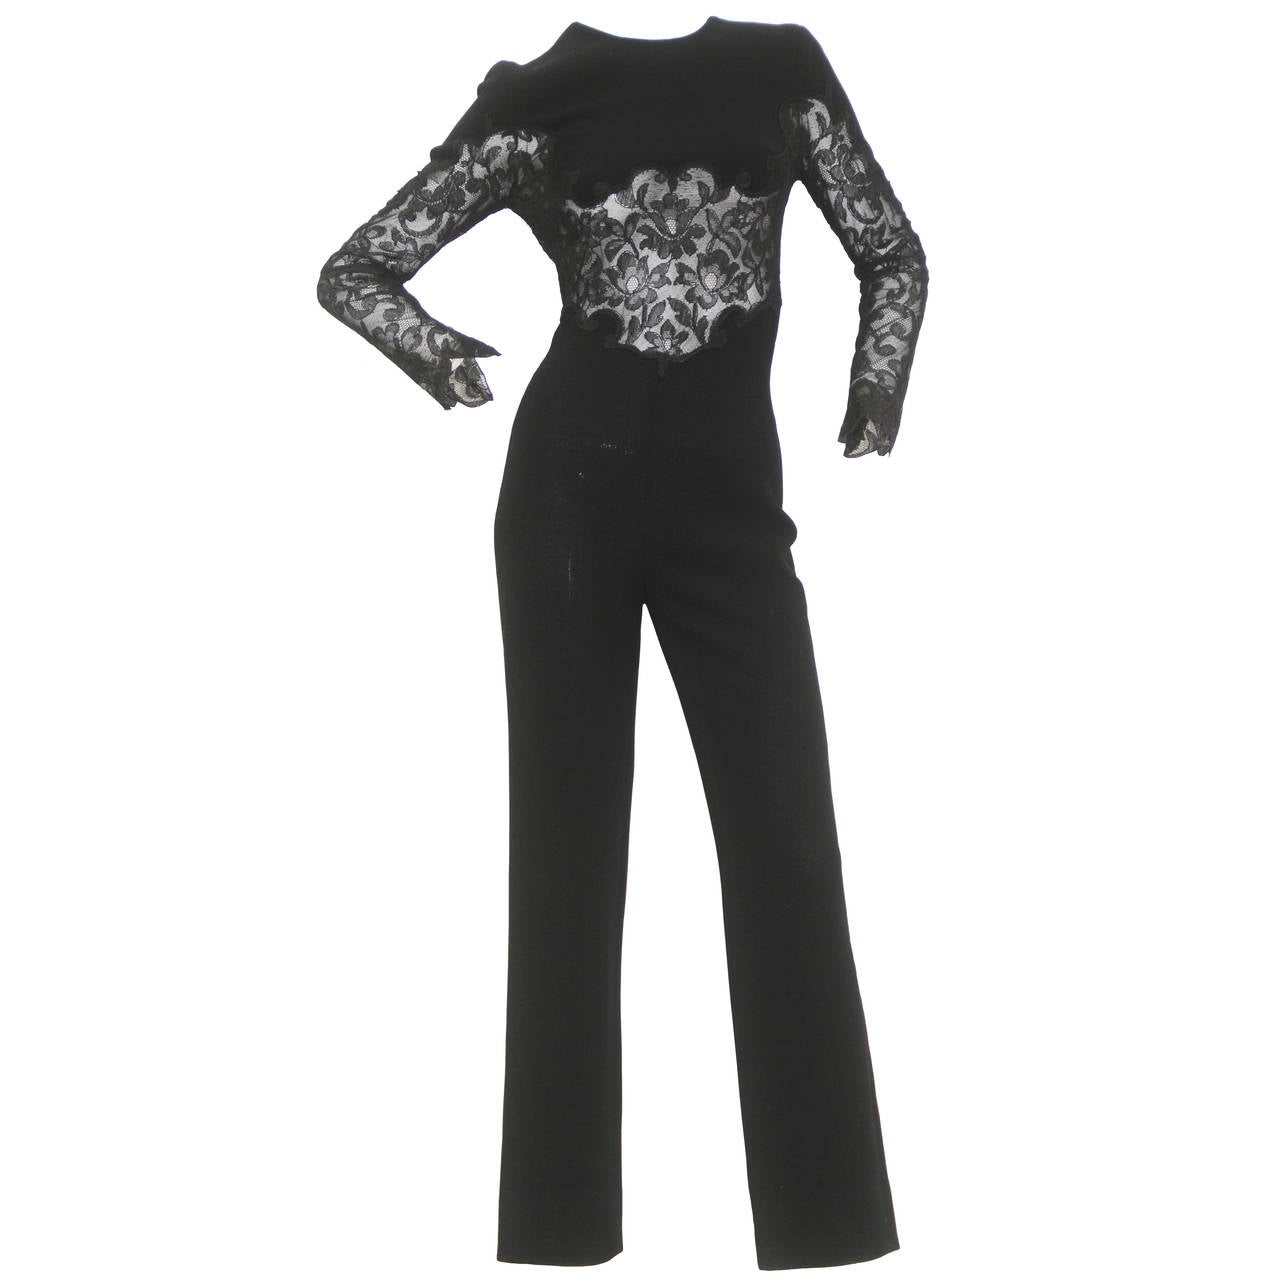 Very Rare Gianni Versace Evening Jumpsuit With Sheer Lace Panels Fall 1991 For Sale